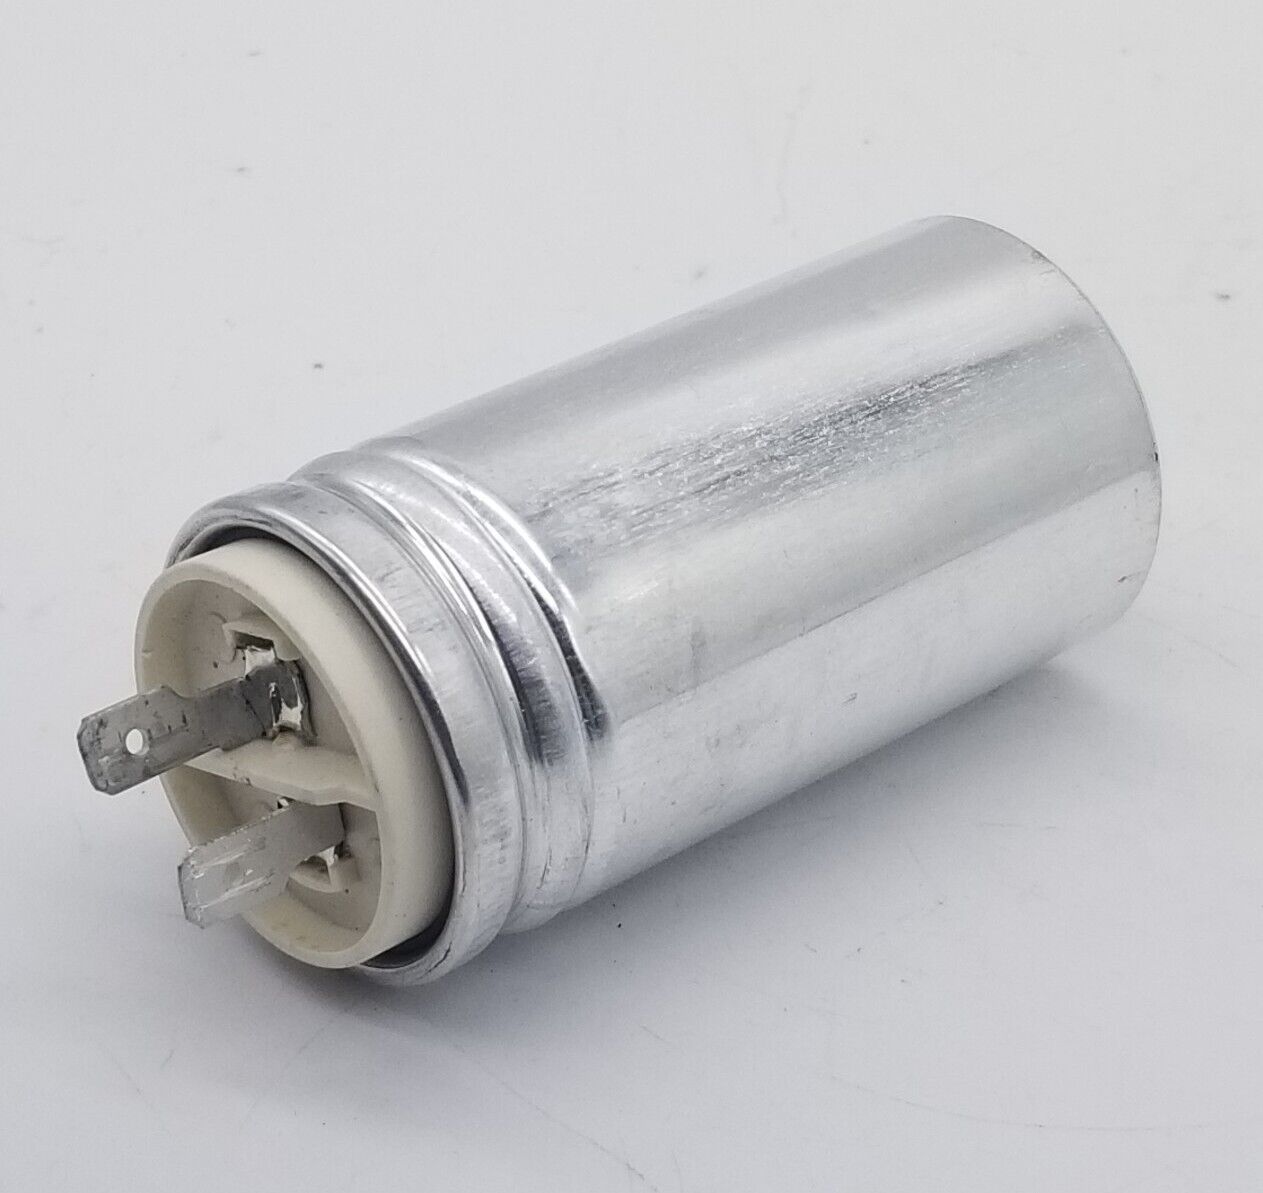 New Genuine OEM Replacement for Bosch Range Hood Capacitor 00605477